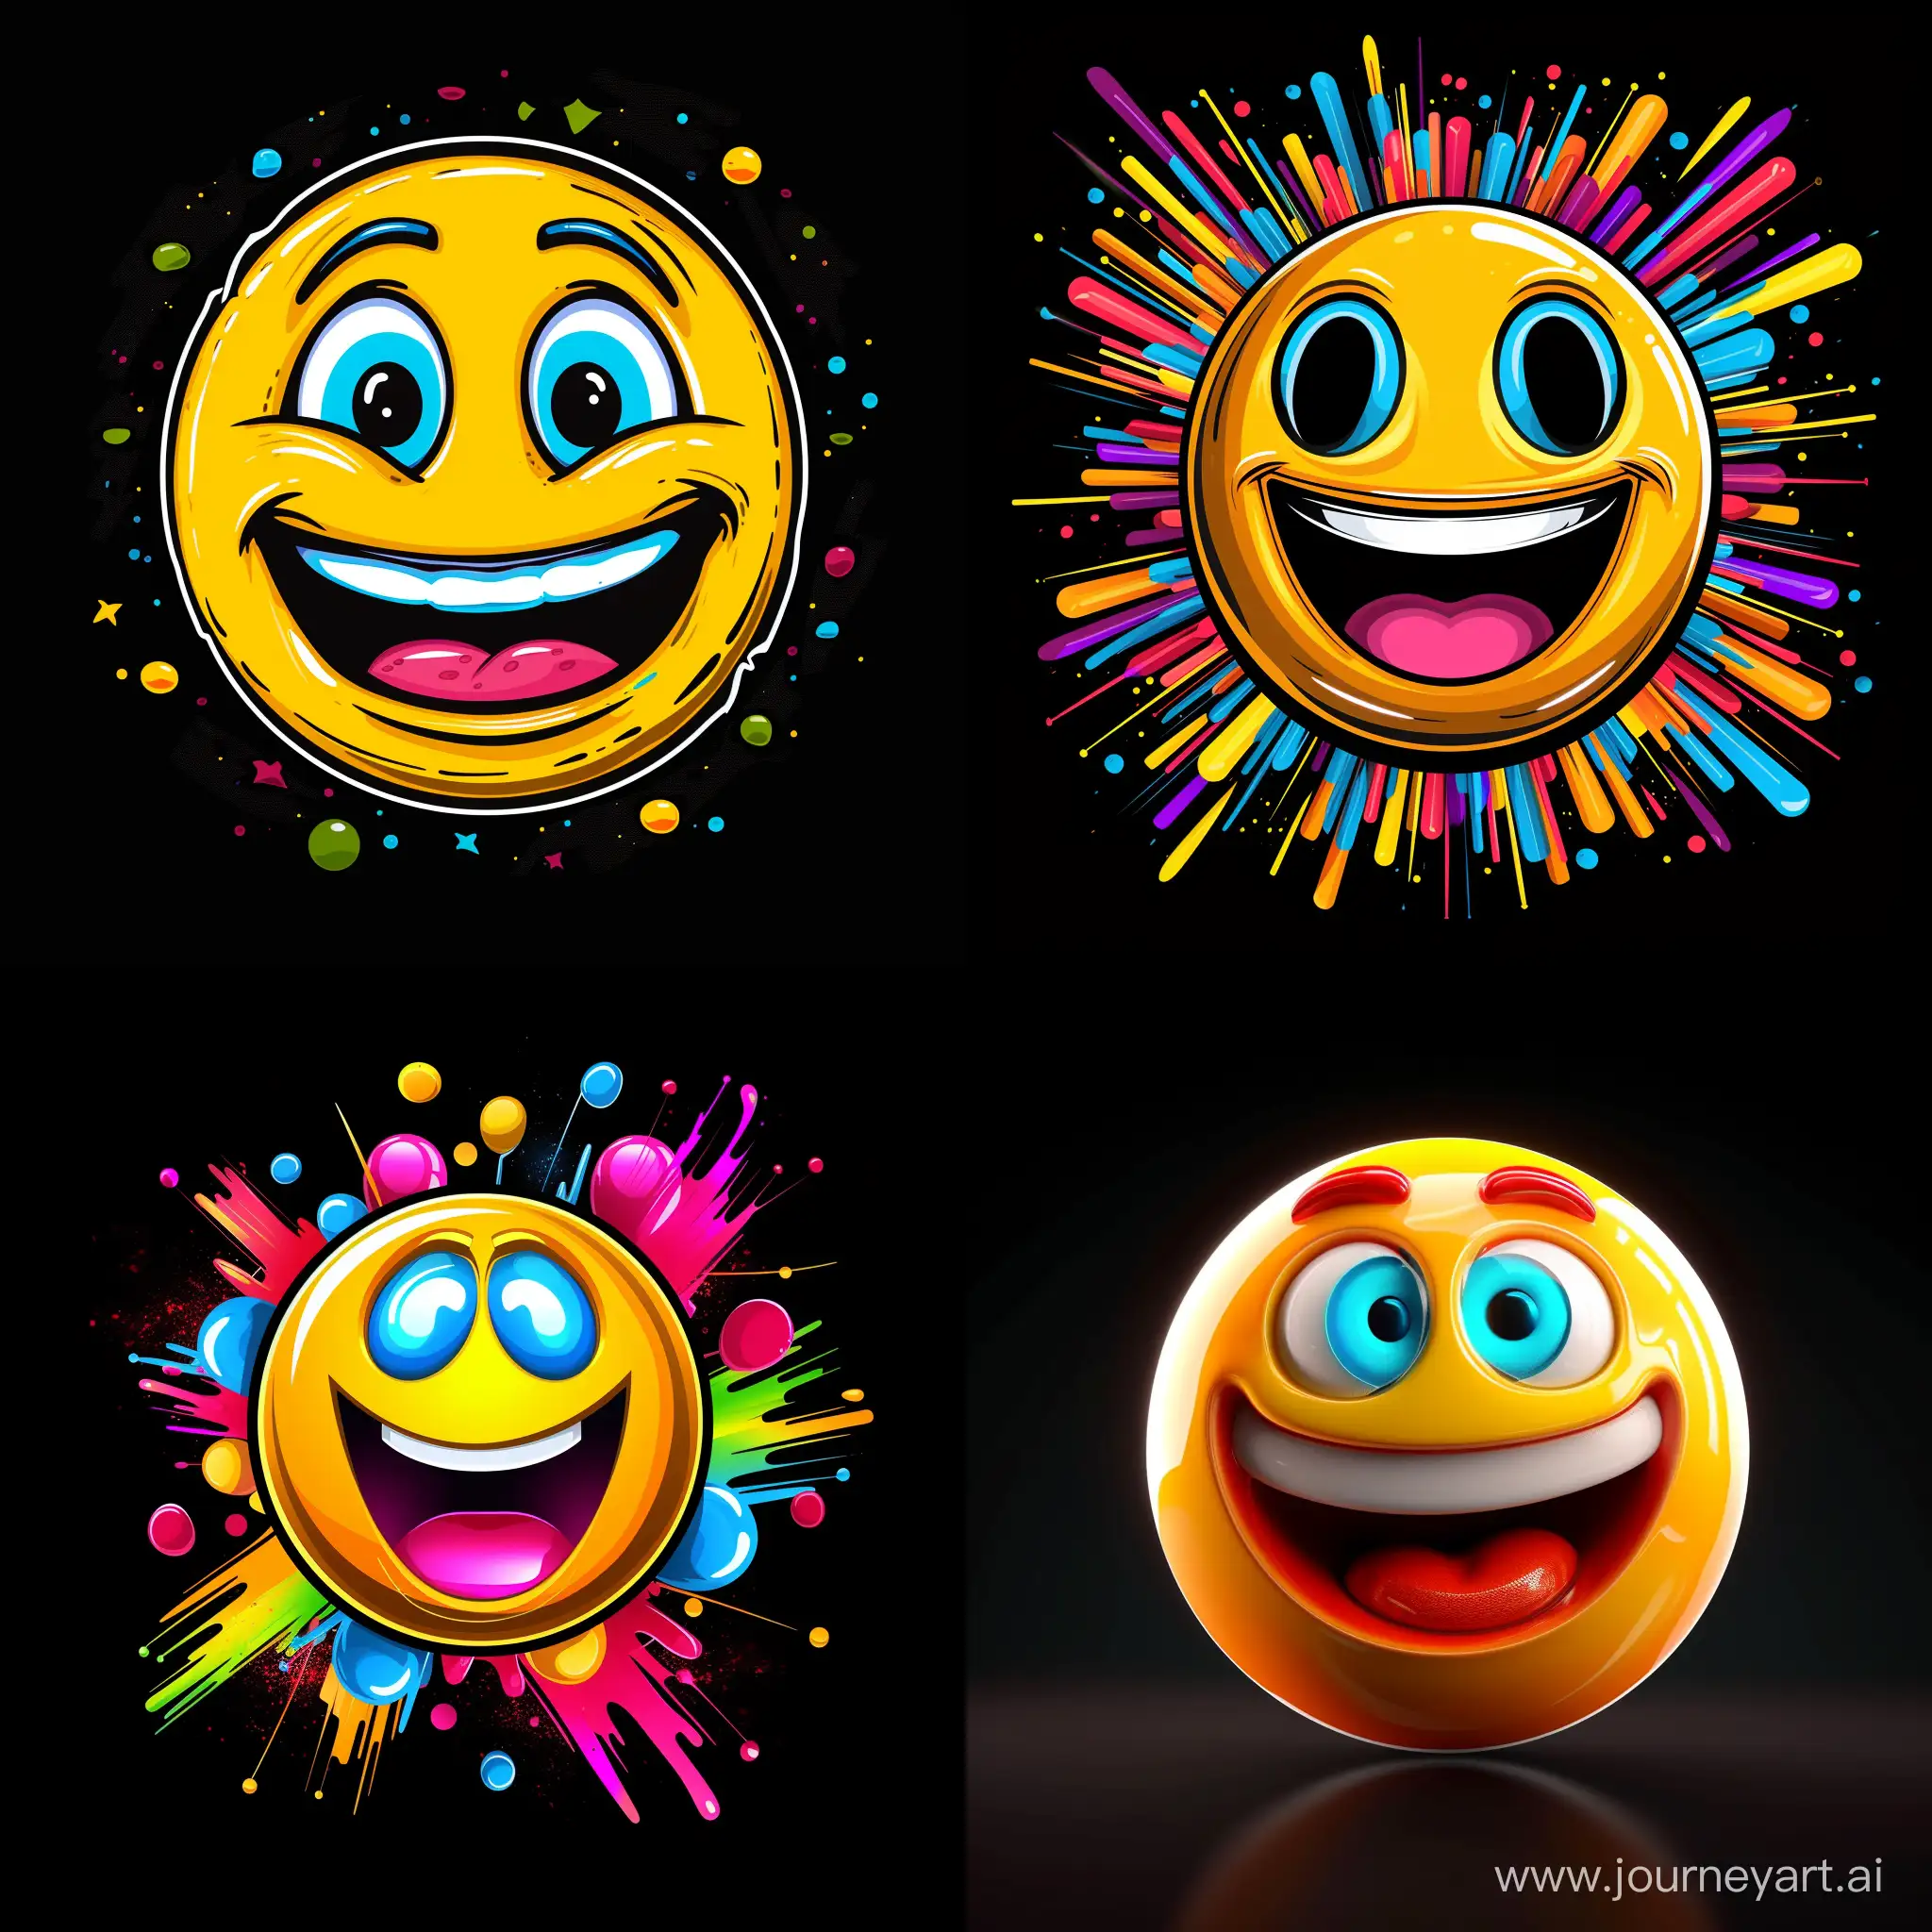 smiling Emoji face , tailored for t-shirt art. The design combines 3D vector art with bright, bold, colorful elements against a black background,